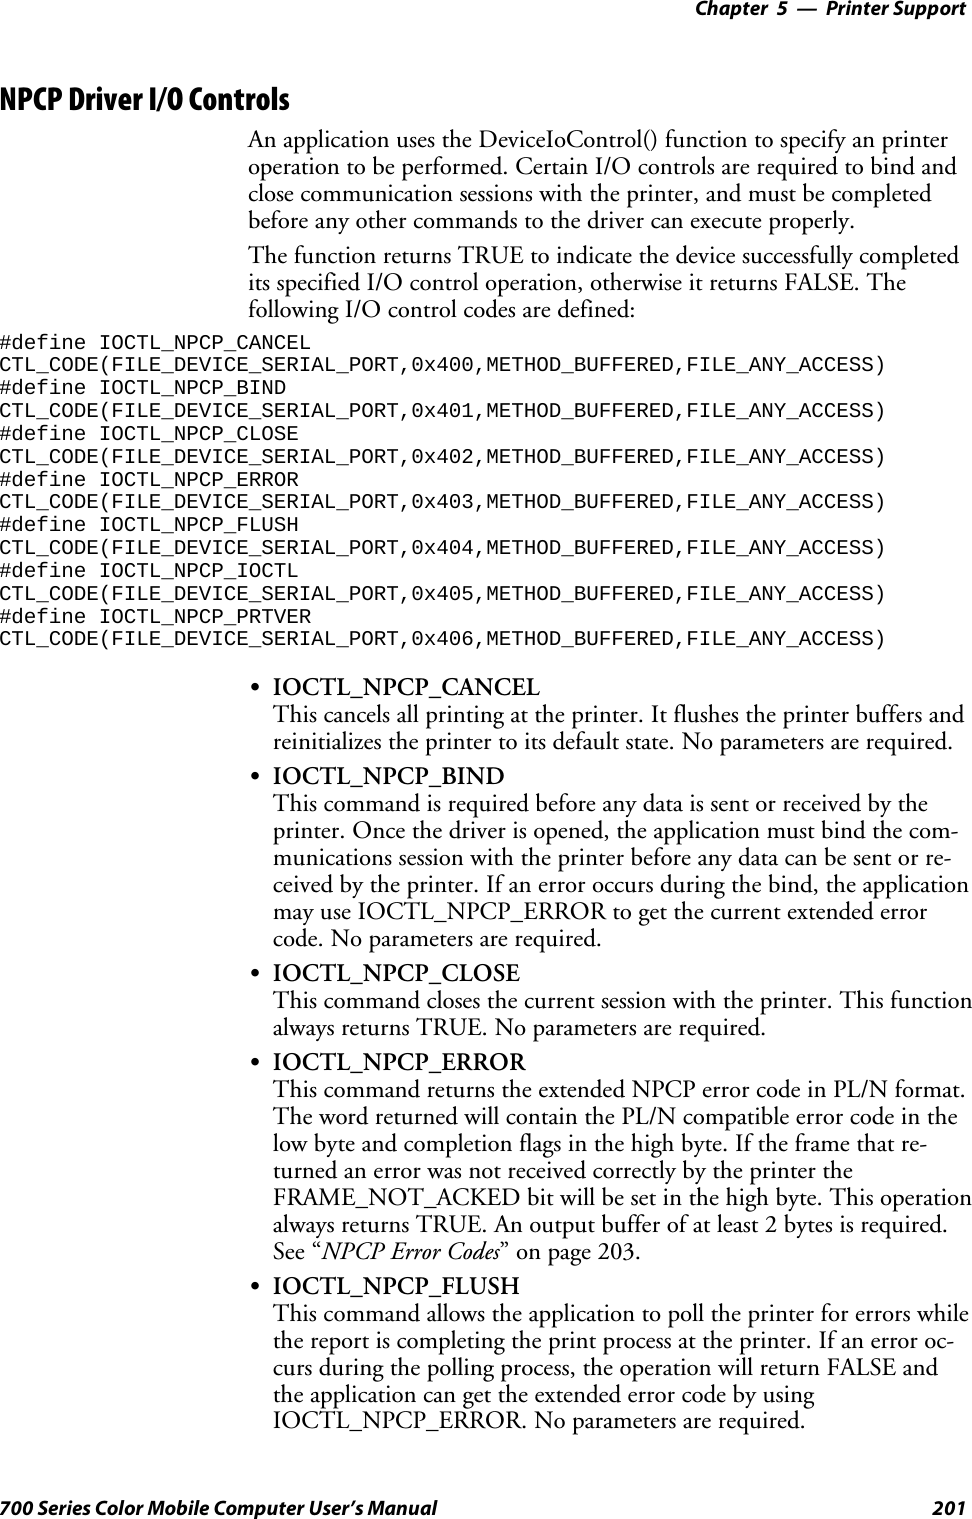 Printer Support—Chapter 5201700 Series Color Mobile Computer User’s ManualNPCP Driver I/O ControlsAn application uses the DeviceIoControl() function to specify an printeroperation to be performed. Certain I/O controls are required to bind andclose communication sessions with the printer, and must be completedbefore any other commands to the driver can execute properly.The function returns TRUE to indicate the device successfully completedits specified I/O control operation, otherwise it returns FALSE. Thefollowing I/O control codes are defined:#define IOCTL_NPCP_CANCELCTL_CODE(FILE_DEVICE_SERIAL_PORT,0x400,METHOD_BUFFERED,FILE_ANY_ACCESS)#define IOCTL_NPCP_BINDCTL_CODE(FILE_DEVICE_SERIAL_PORT,0x401,METHOD_BUFFERED,FILE_ANY_ACCESS)#define IOCTL_NPCP_CLOSECTL_CODE(FILE_DEVICE_SERIAL_PORT,0x402,METHOD_BUFFERED,FILE_ANY_ACCESS)#define IOCTL_NPCP_ERRORCTL_CODE(FILE_DEVICE_SERIAL_PORT,0x403,METHOD_BUFFERED,FILE_ANY_ACCESS)#define IOCTL_NPCP_FLUSHCTL_CODE(FILE_DEVICE_SERIAL_PORT,0x404,METHOD_BUFFERED,FILE_ANY_ACCESS)#define IOCTL_NPCP_IOCTLCTL_CODE(FILE_DEVICE_SERIAL_PORT,0x405,METHOD_BUFFERED,FILE_ANY_ACCESS)#define IOCTL_NPCP_PRTVERCTL_CODE(FILE_DEVICE_SERIAL_PORT,0x406,METHOD_BUFFERED,FILE_ANY_ACCESS)SIOCTL_NPCP_CANCELThis cancels all printing at the printer. It flushes the printer buffers andreinitializes the printer to its default state. No parameters are required.SIOCTL_NPCP_BINDThis command is required before any data is sent or received by theprinter. Once the driver is opened, the application must bind the com-munications session with the printer before any data can be sent or re-ceived by the printer. If an error occurs during the bind, the applicationmay use IOCTL_NPCP_ERROR to get the current extended errorcode. No parameters are required.SIOCTL_NPCP_CLOSEThis command closes the current session with the printer. This functionalways returns TRUE. No parameters are required.SIOCTL_NPCP_ERRORThis command returns the extended NPCP error code in PL/N format.The word returned will contain the PL/N compatible error code in thelow byte and completion flags in the high byte. If the frame that re-turned an error was not received correctly by the printer theFRAME_NOT_ACKED bit will be set in the high byte. This operationalways returns TRUE. An output buffer of at least 2 bytes is required.See “NPCP Error Codes” on page 203.SIOCTL_NPCP_FLUSHThis command allows the application to poll the printer for errors whilethe report is completing the print process at the printer. If an error oc-curs during the polling process, the operation will return FALSE andthe application can get the extended error code by usingIOCTL_NPCP_ERROR. No parameters are required.